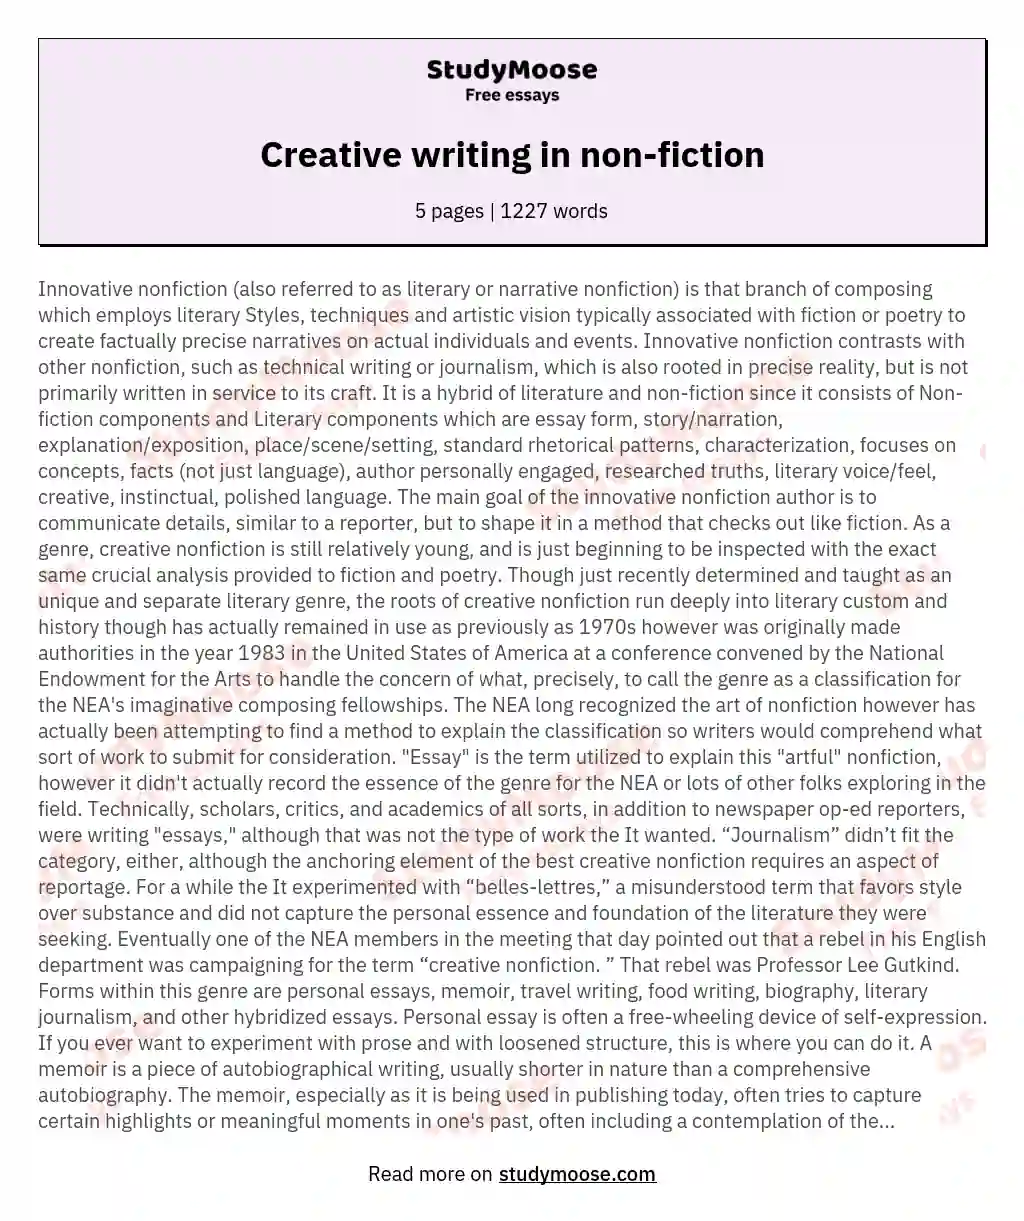 Creative writing in non-fiction